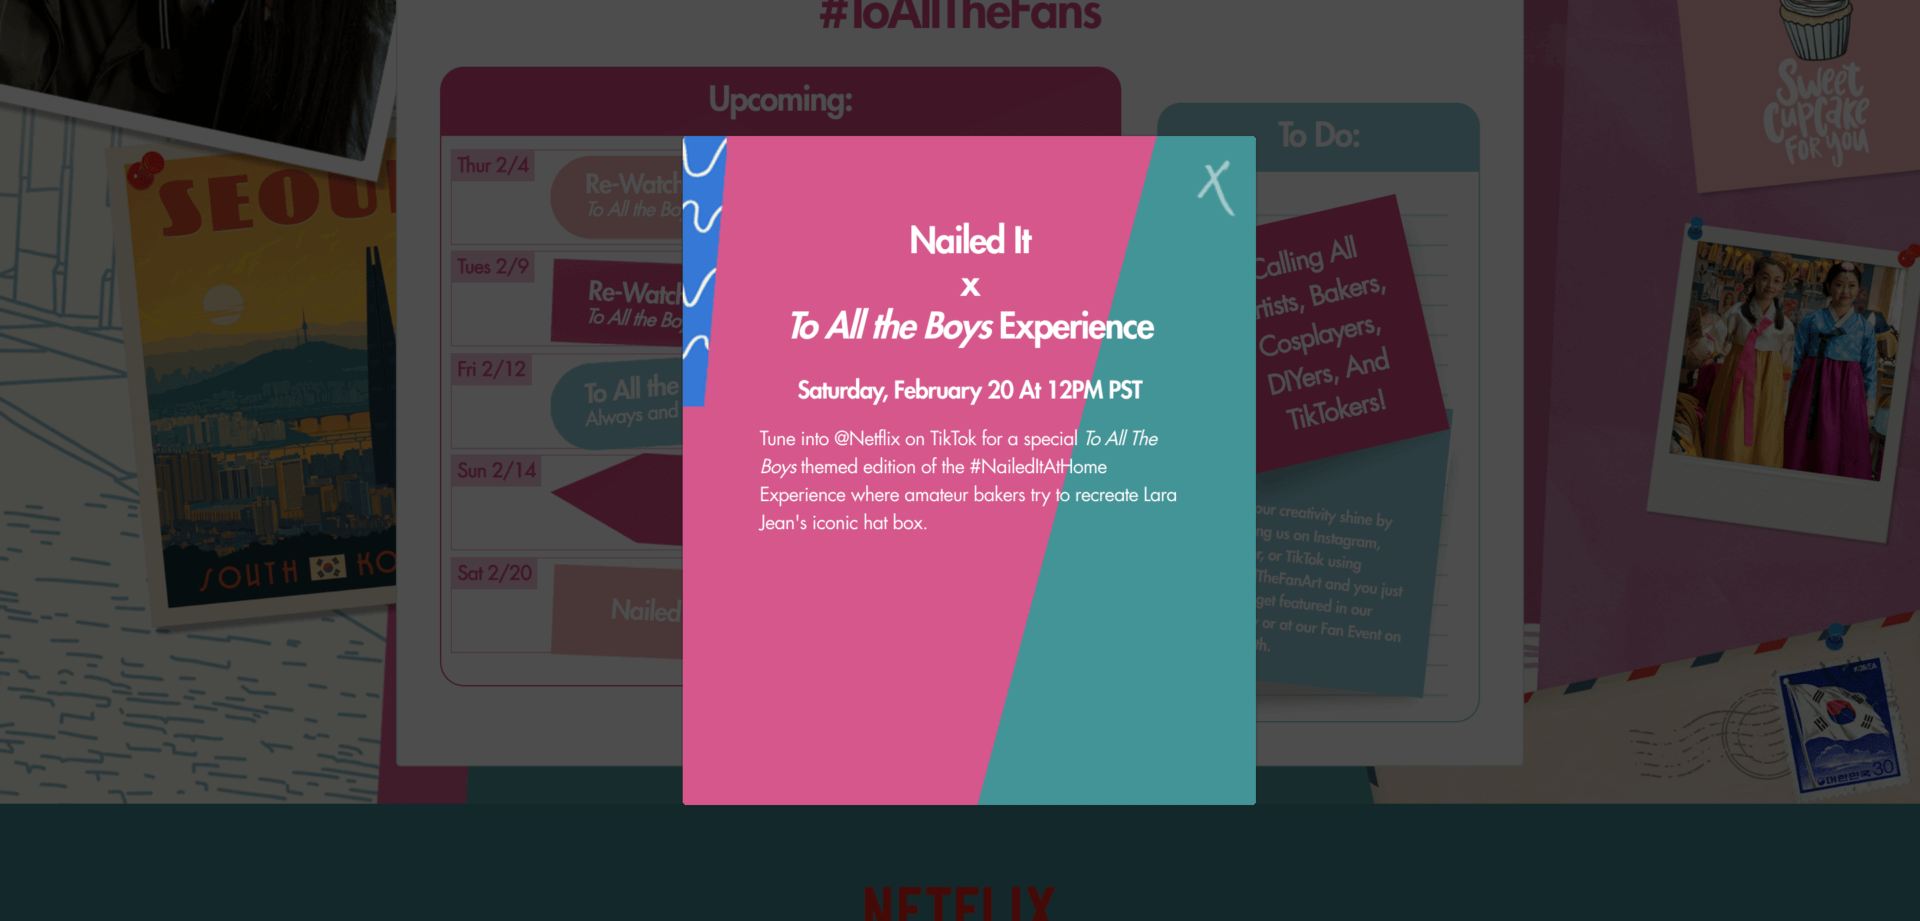 Netflix: To All The Boys 